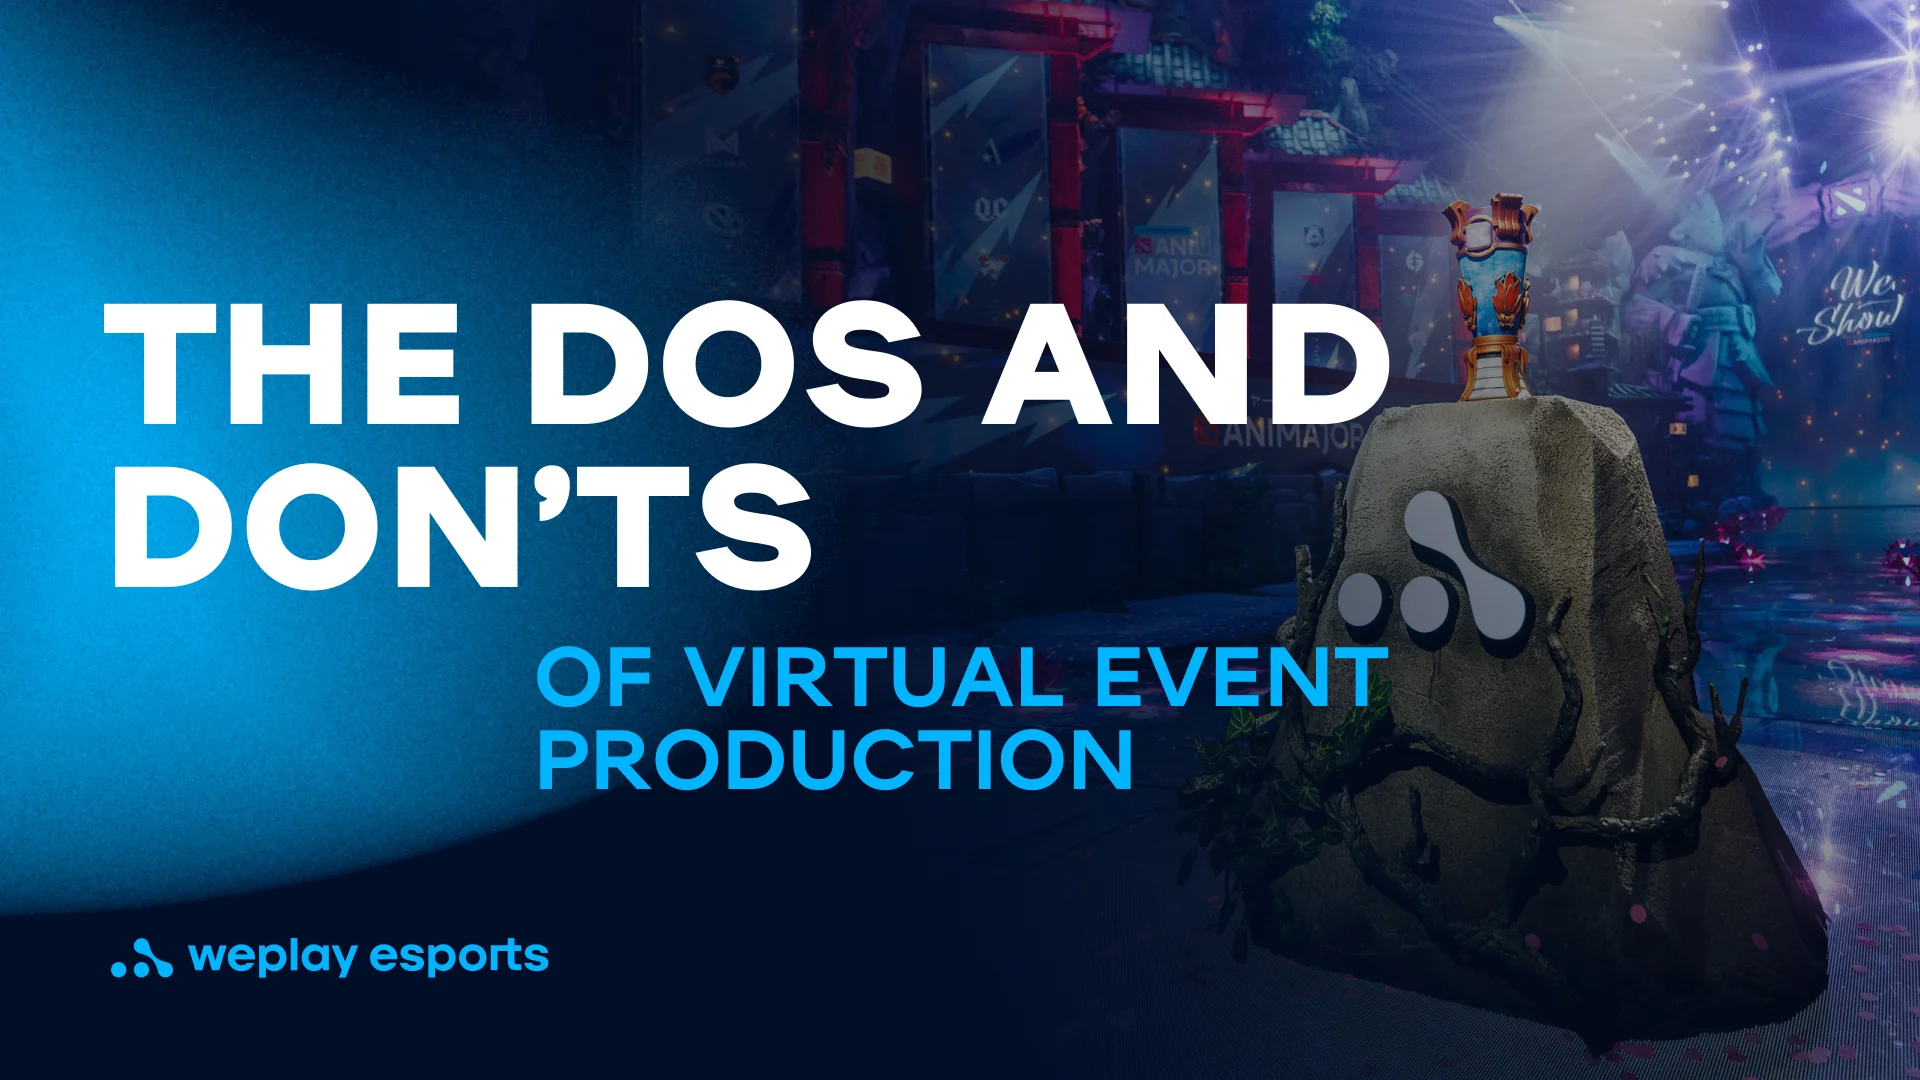 The Dos and Don’ts of virtual event production. Credit: WePlay Holding